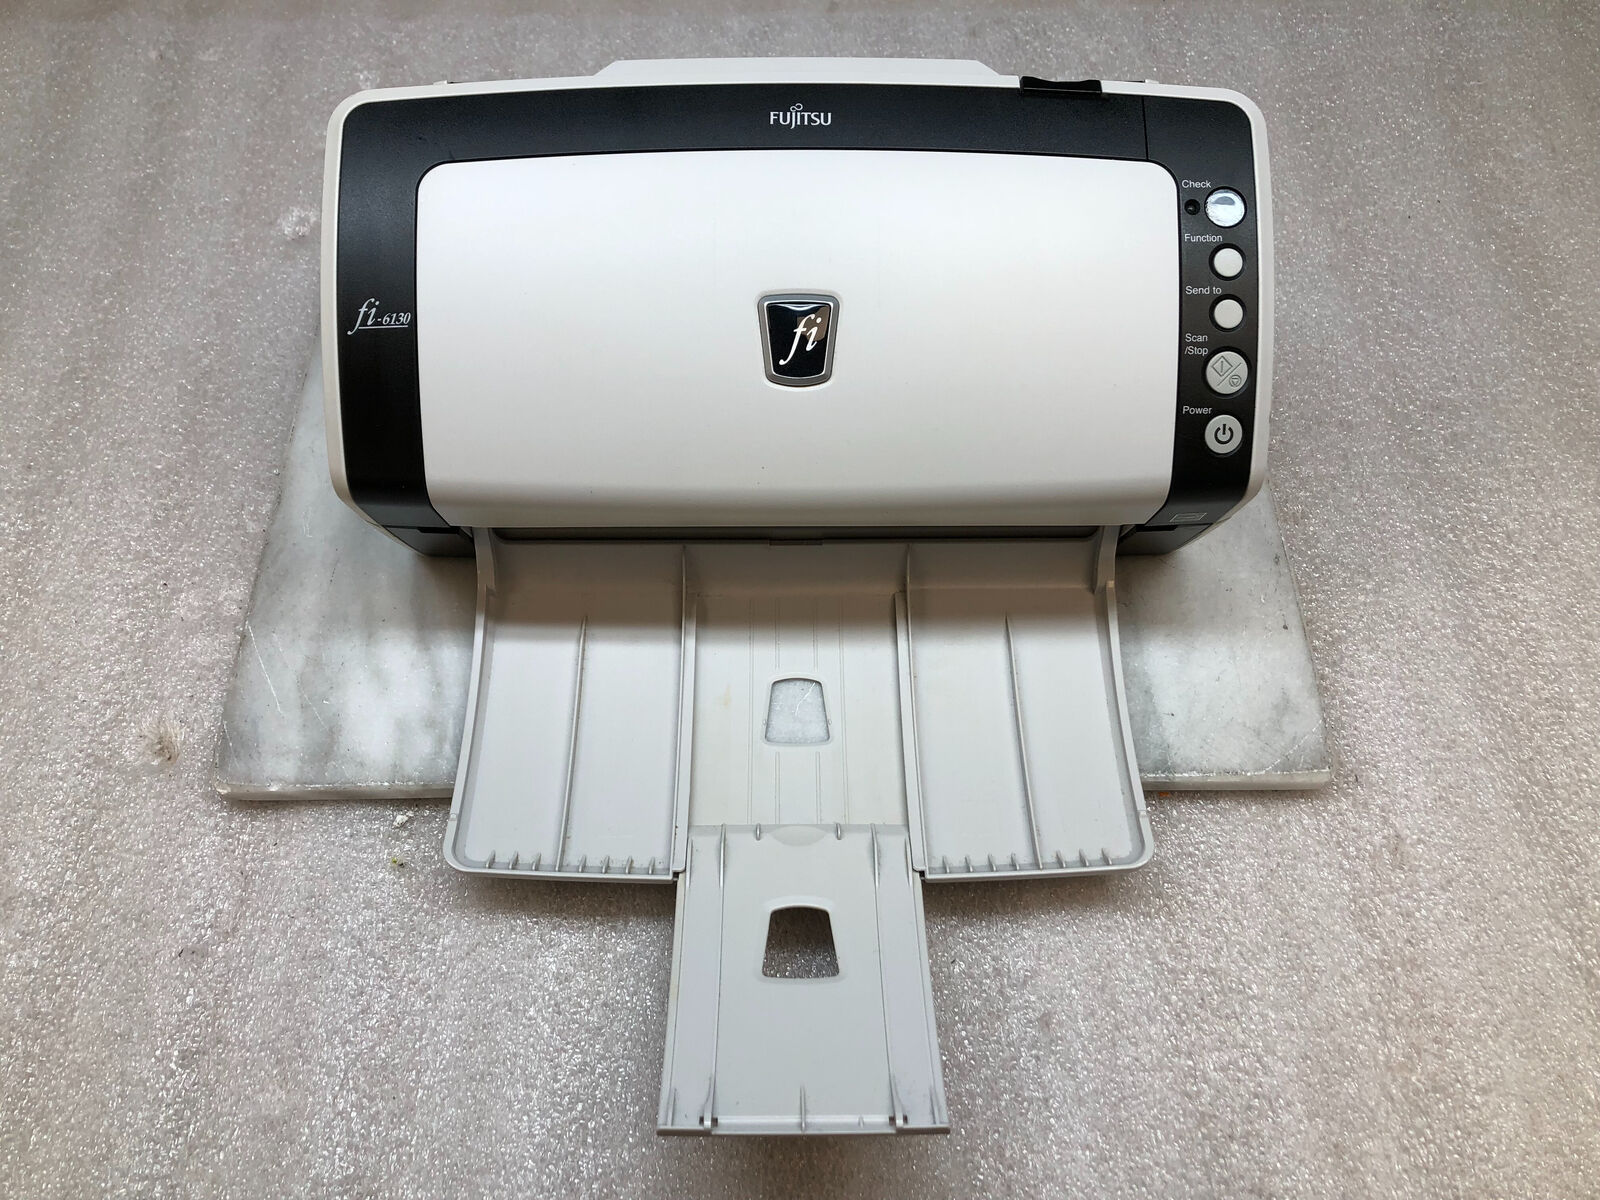 Fujitsu FI-6130 Duplex Document Color Scanner 40k Scan ct NO TOP TRAY TESTED